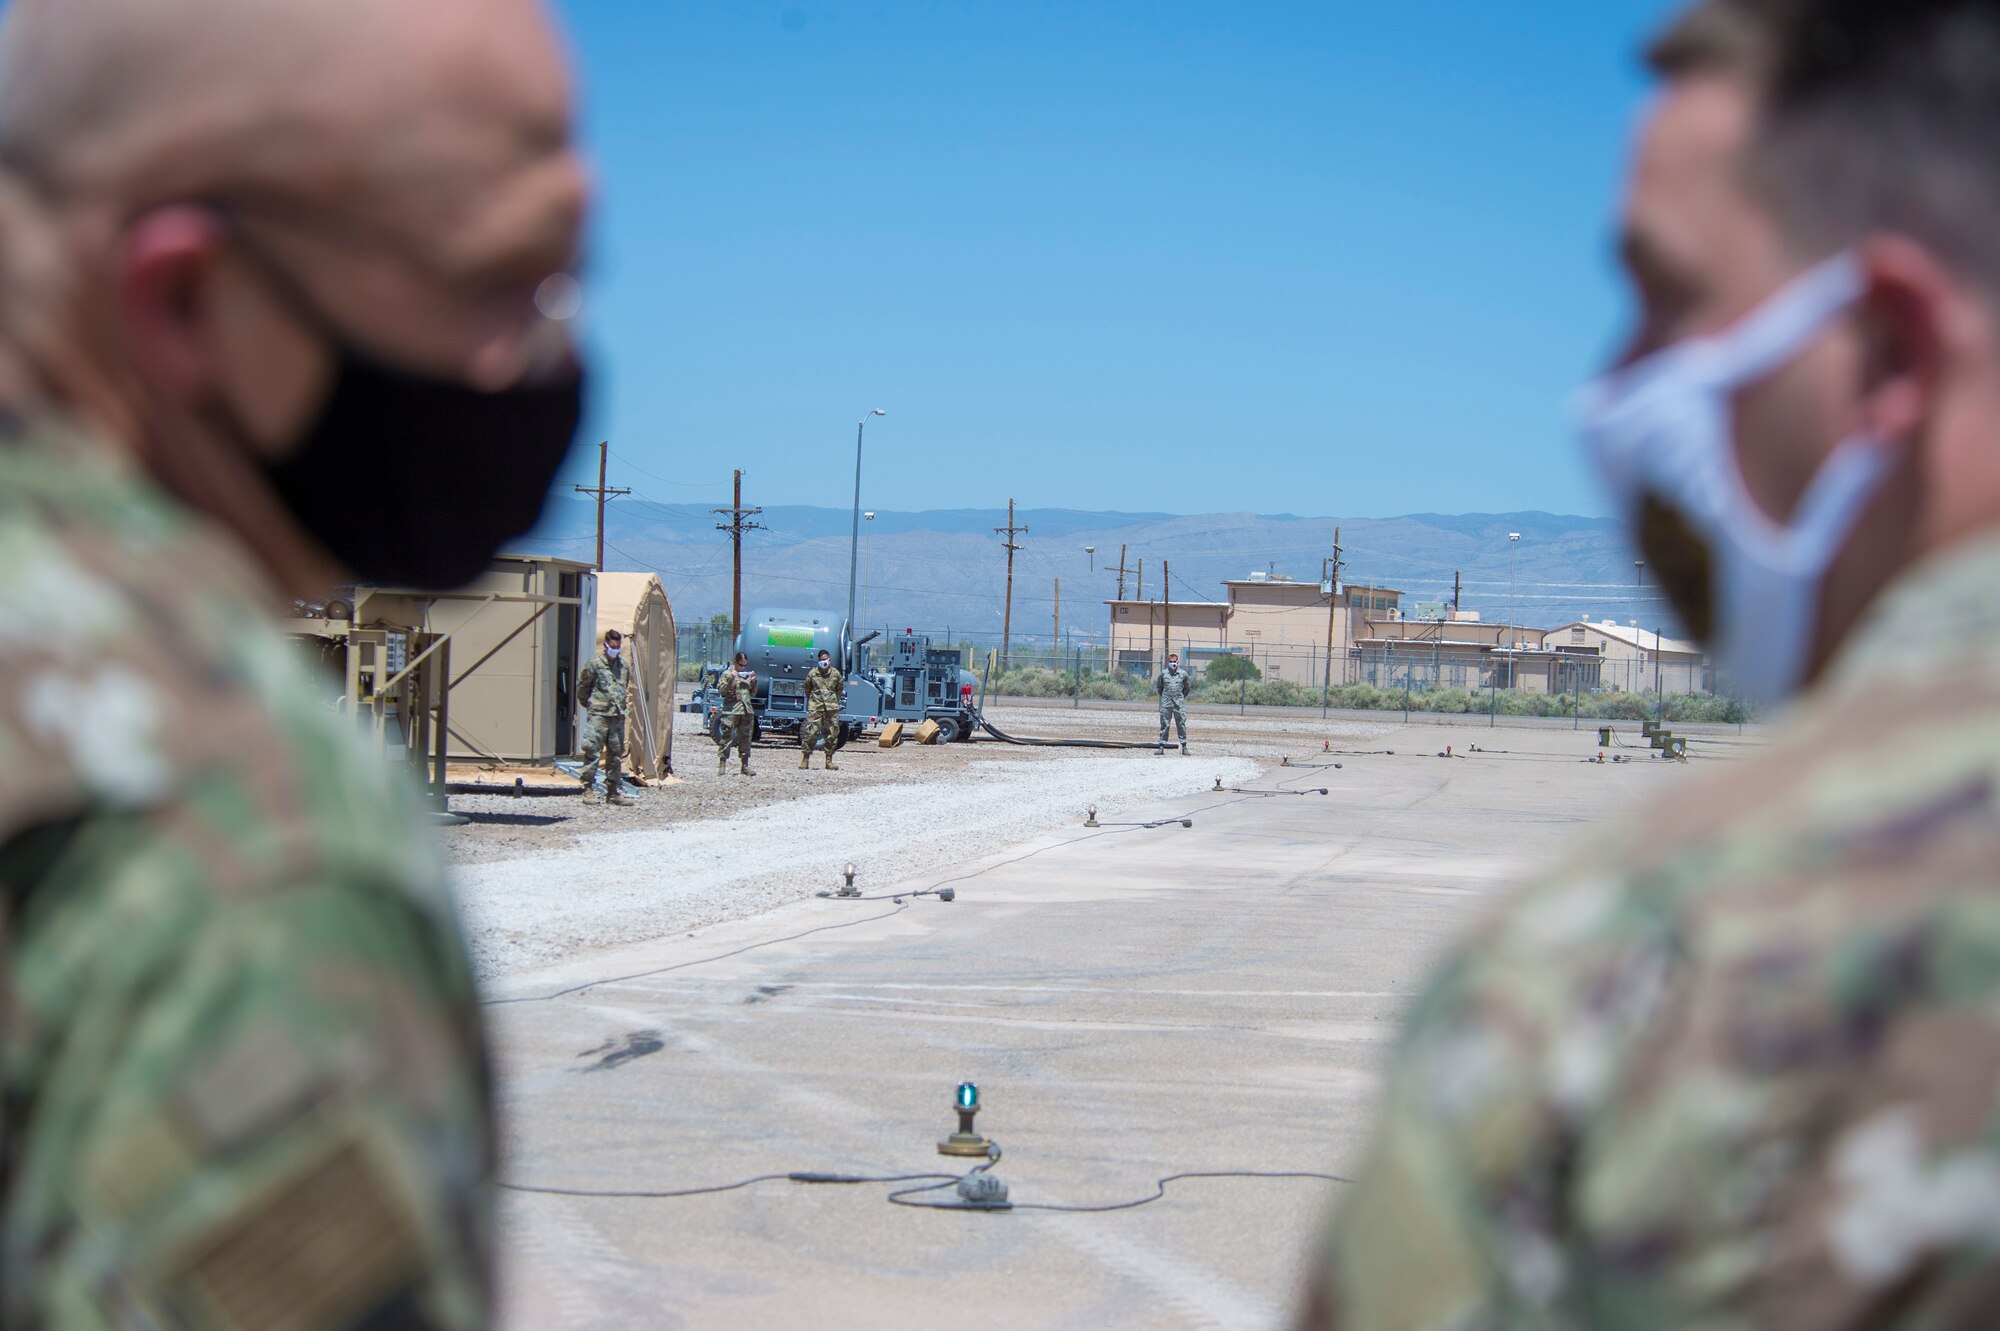 Airmen with the 635th Materiel Maintenance Group wait to give Gen. Arnold W. Bunch Jr., Air Force Materiel Command commander, a tour of Basic Expeditionary Airfield Resources Base, June 29, 2020, on Holloman Air Force Base, N.M. Bunch’s tour included meeting with various Airmen across the installation to see how their mission remained successful despite challenges derived from the global COVID- 19 pandemic. (U.S. Air Force photo by Senior Airman Collette Brooks)